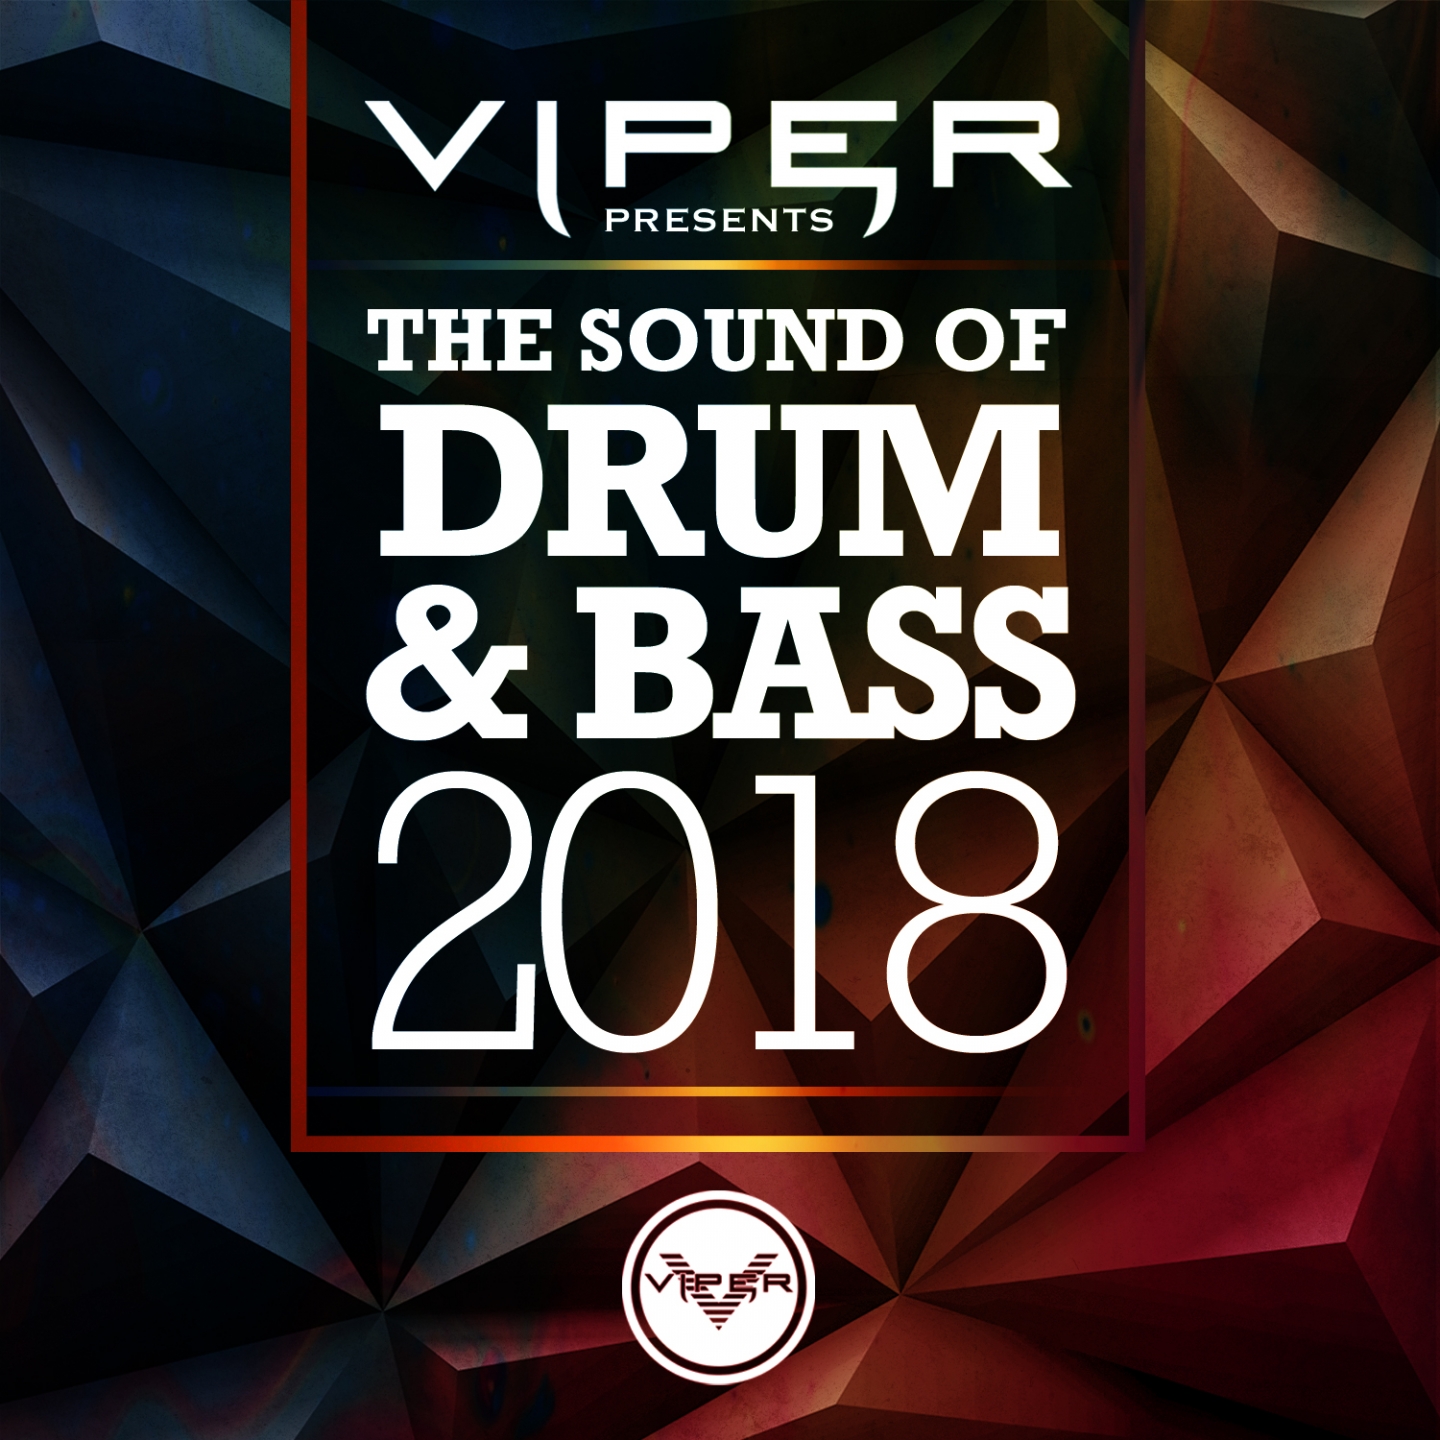 The Sound of Drum & Bass 2018 (Continuous DJ Mix)